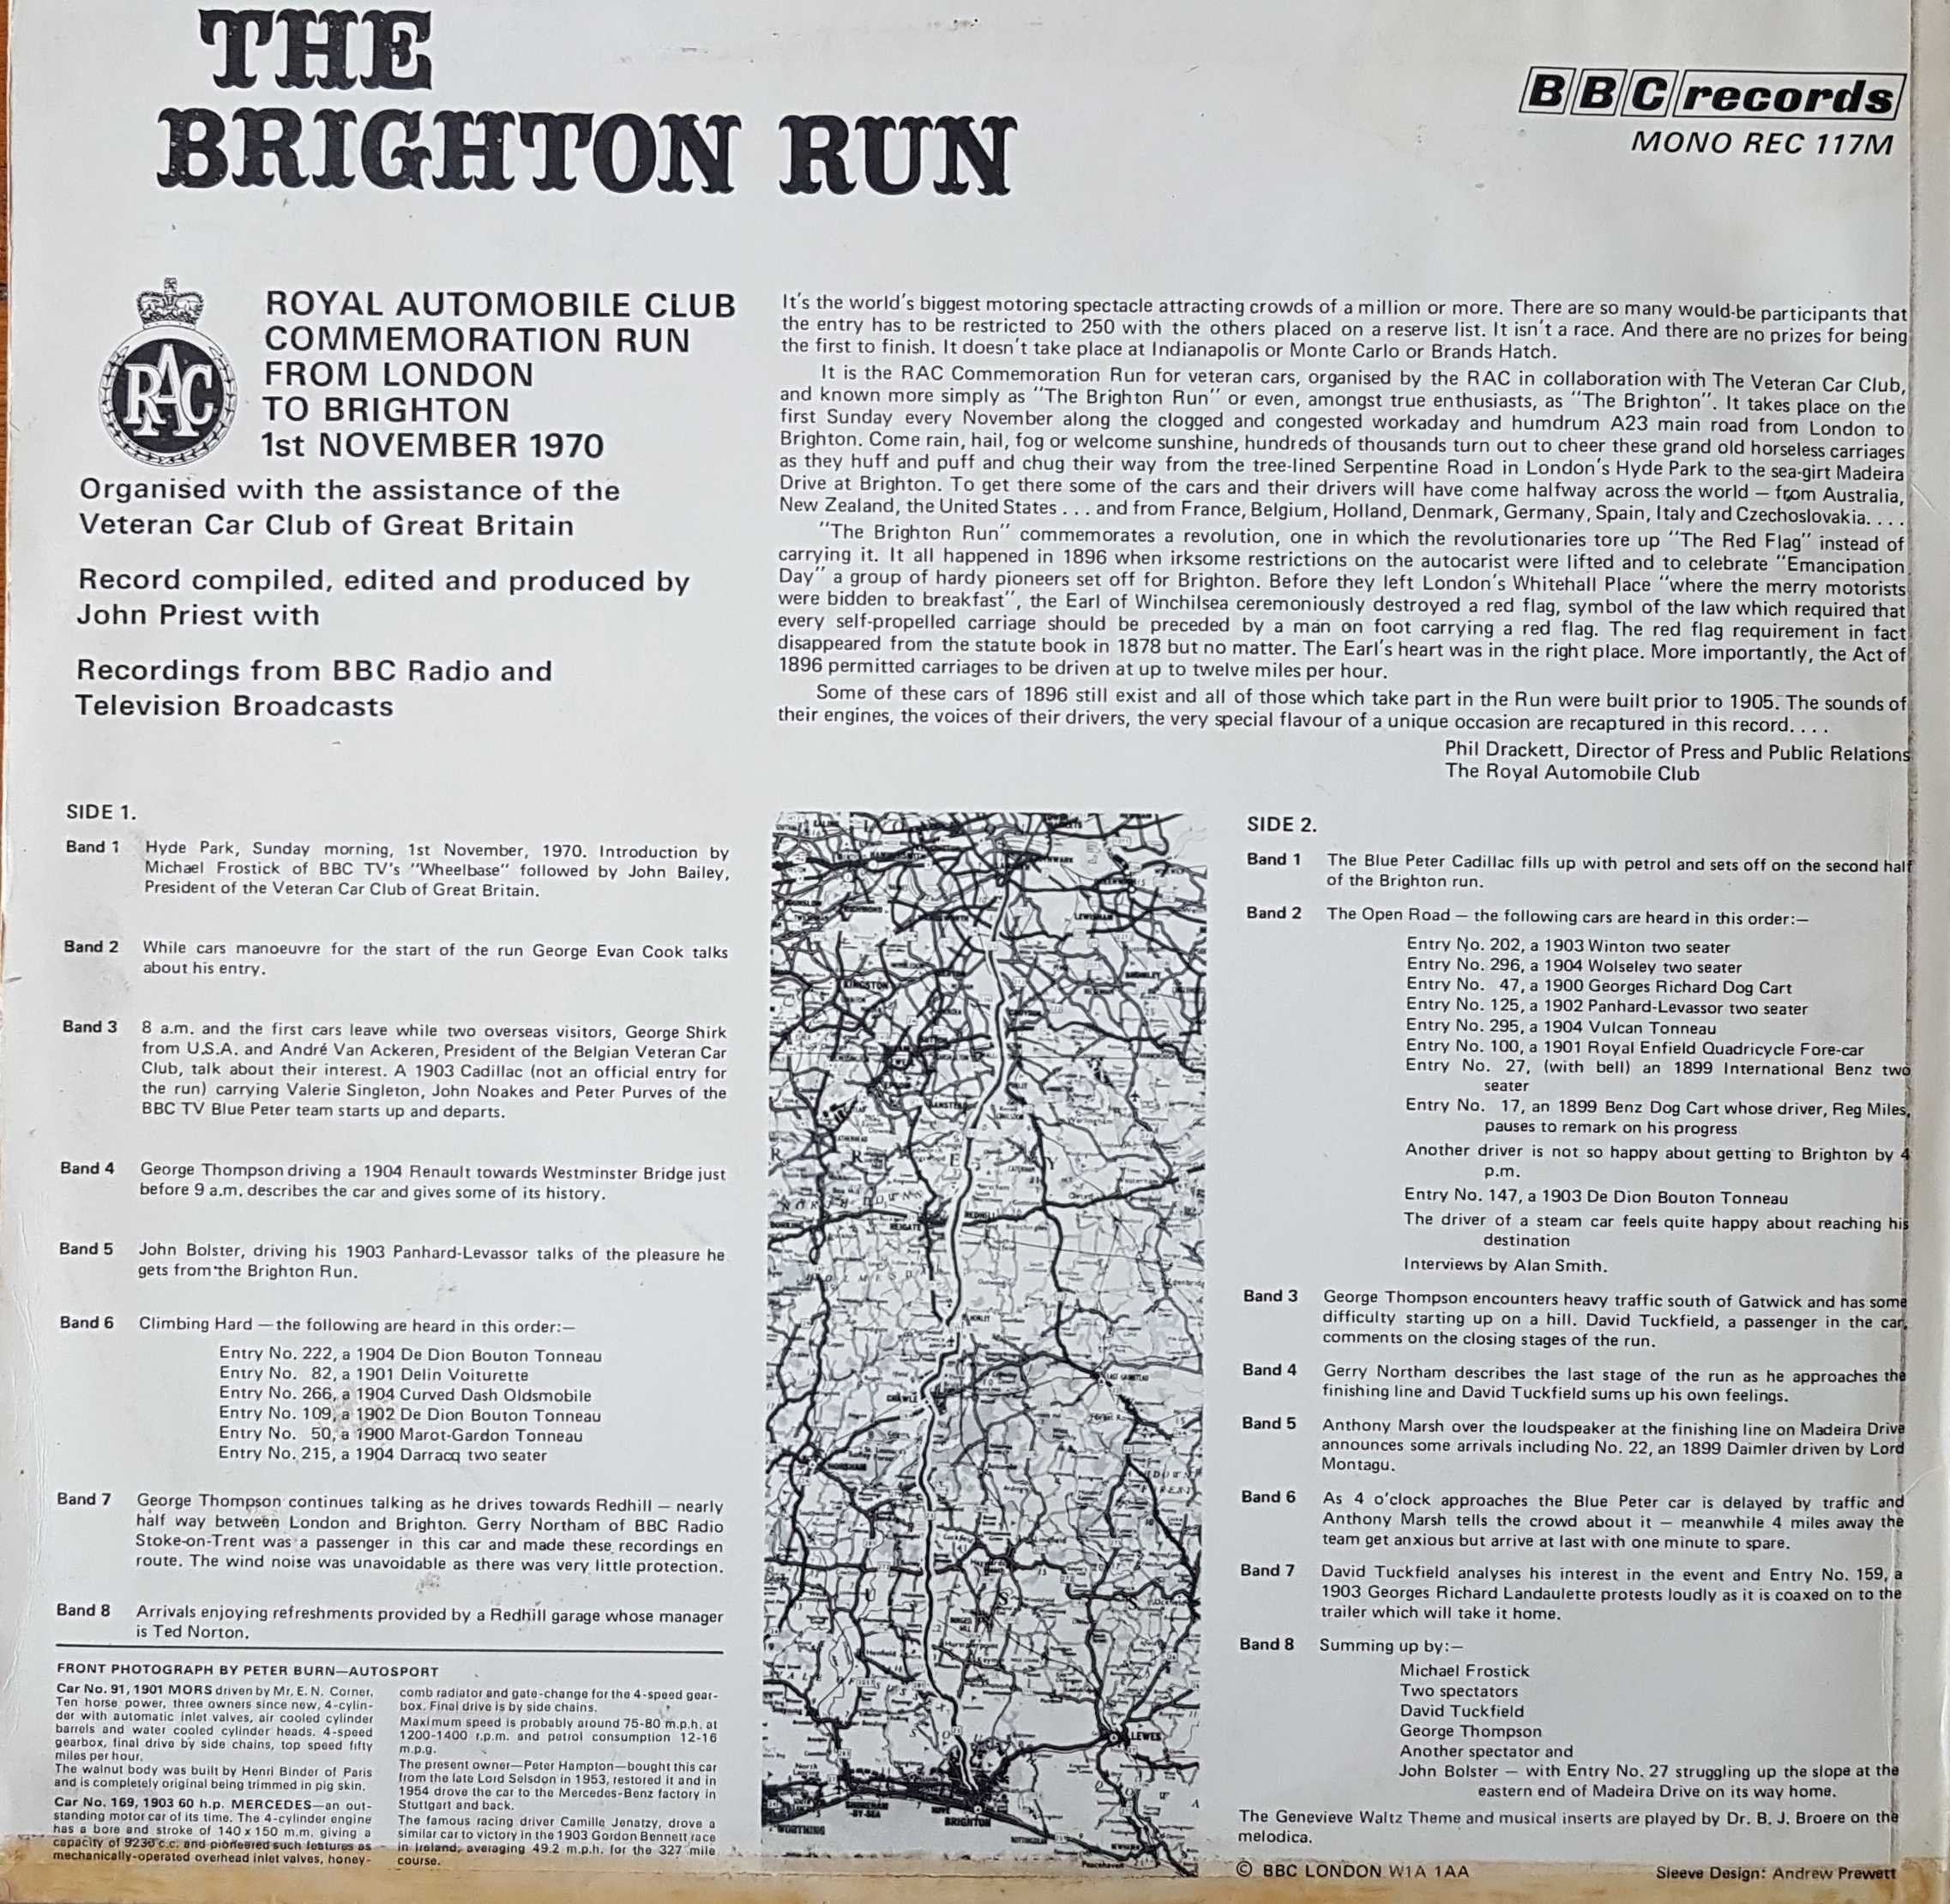 Picture of REC 117 The Brighton run by artist John Priest from the BBC records and Tapes library